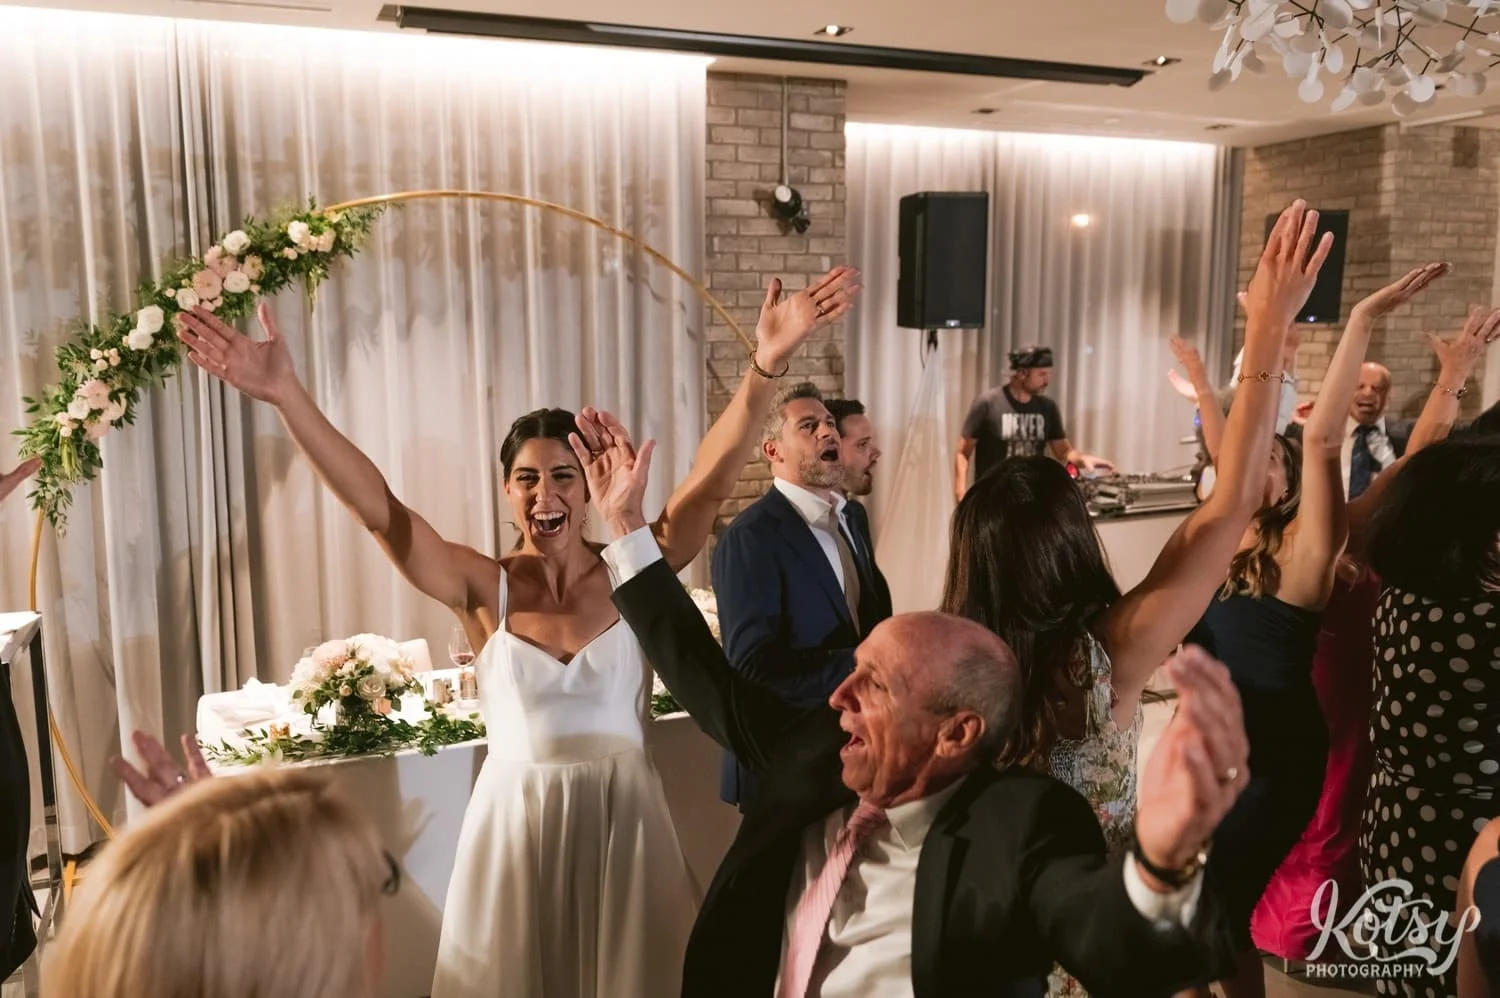 Hands are in the air as a bride and other wedding guests do the YMCA at a Village Loft wedding reception in Toronto, Canada